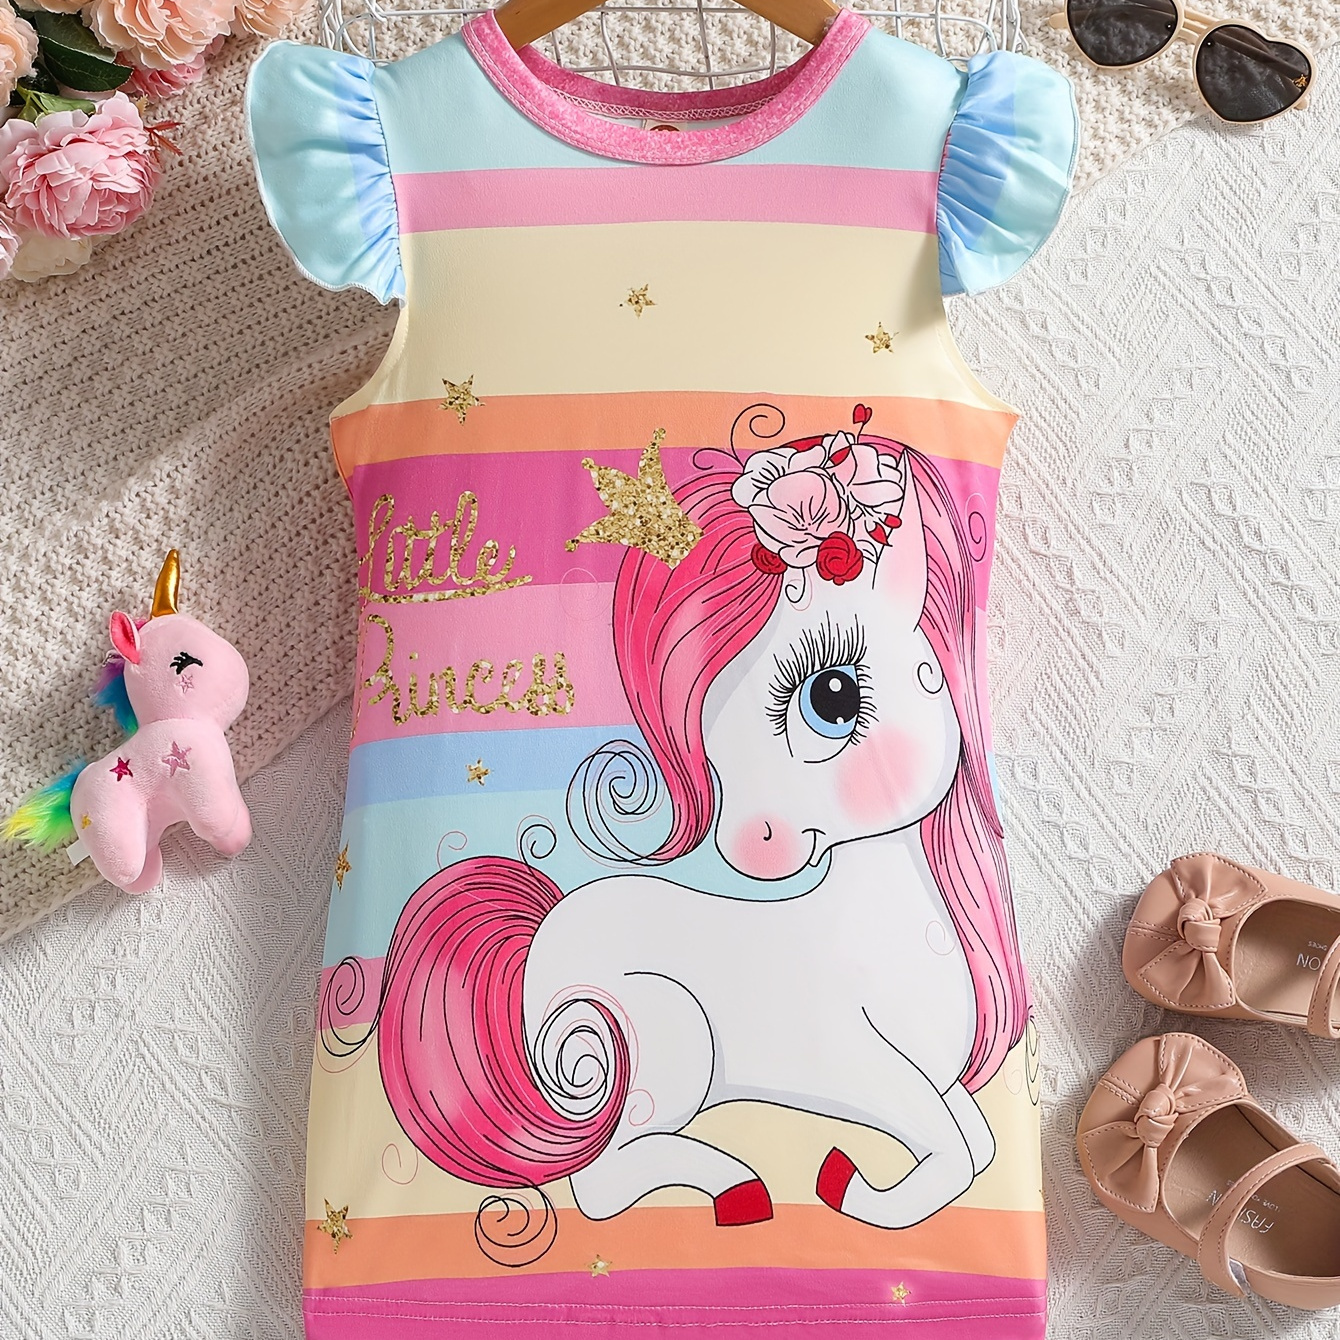 

Dreamy Girls Splicing Unicorn Graphic Colorblock Dress For Summer Gift Party